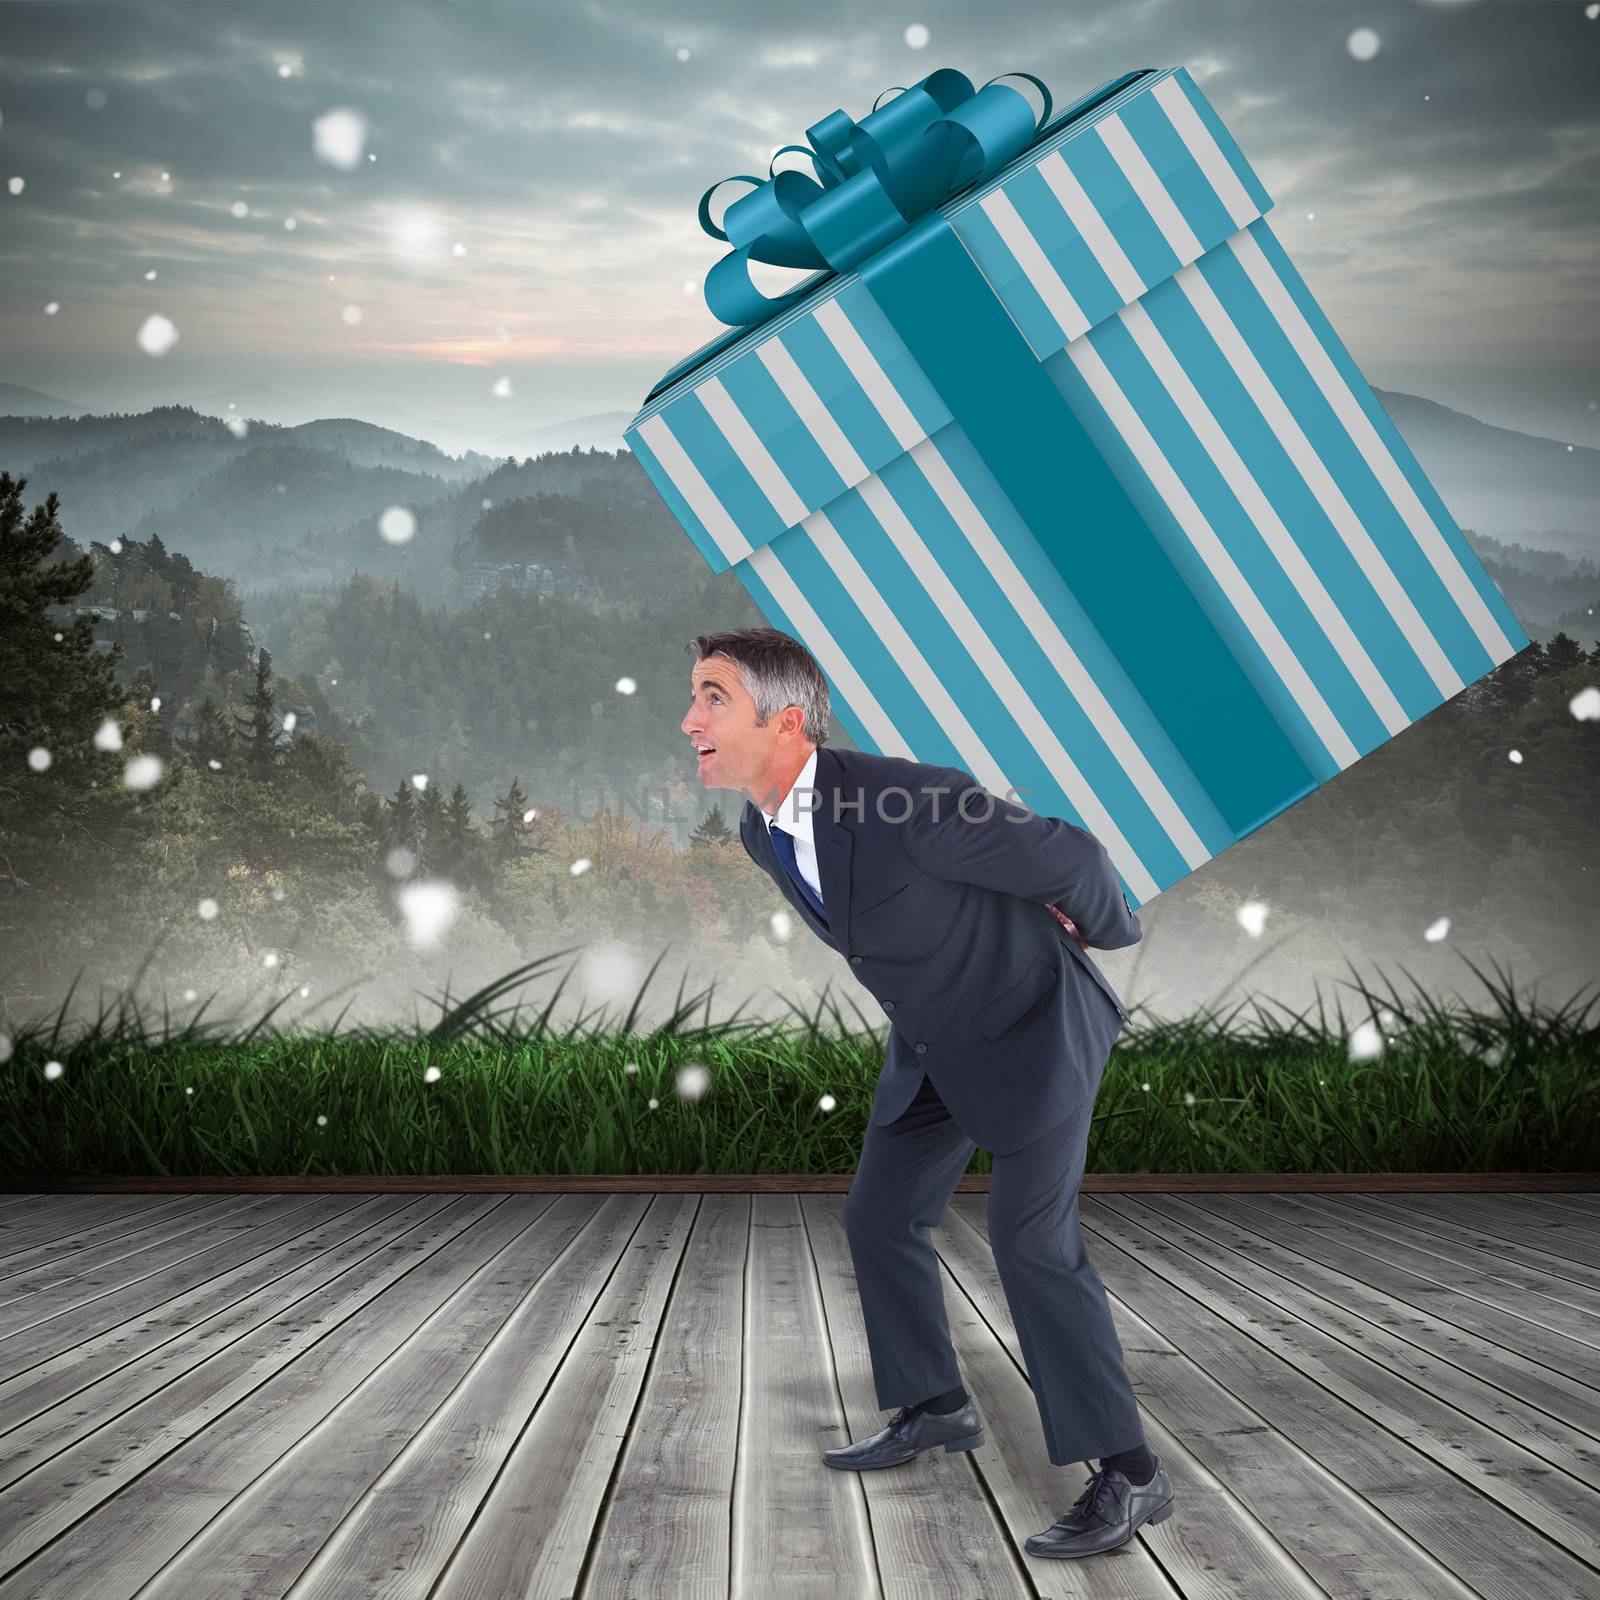 Composite image of stylish man with giant gift by Wavebreakmedia